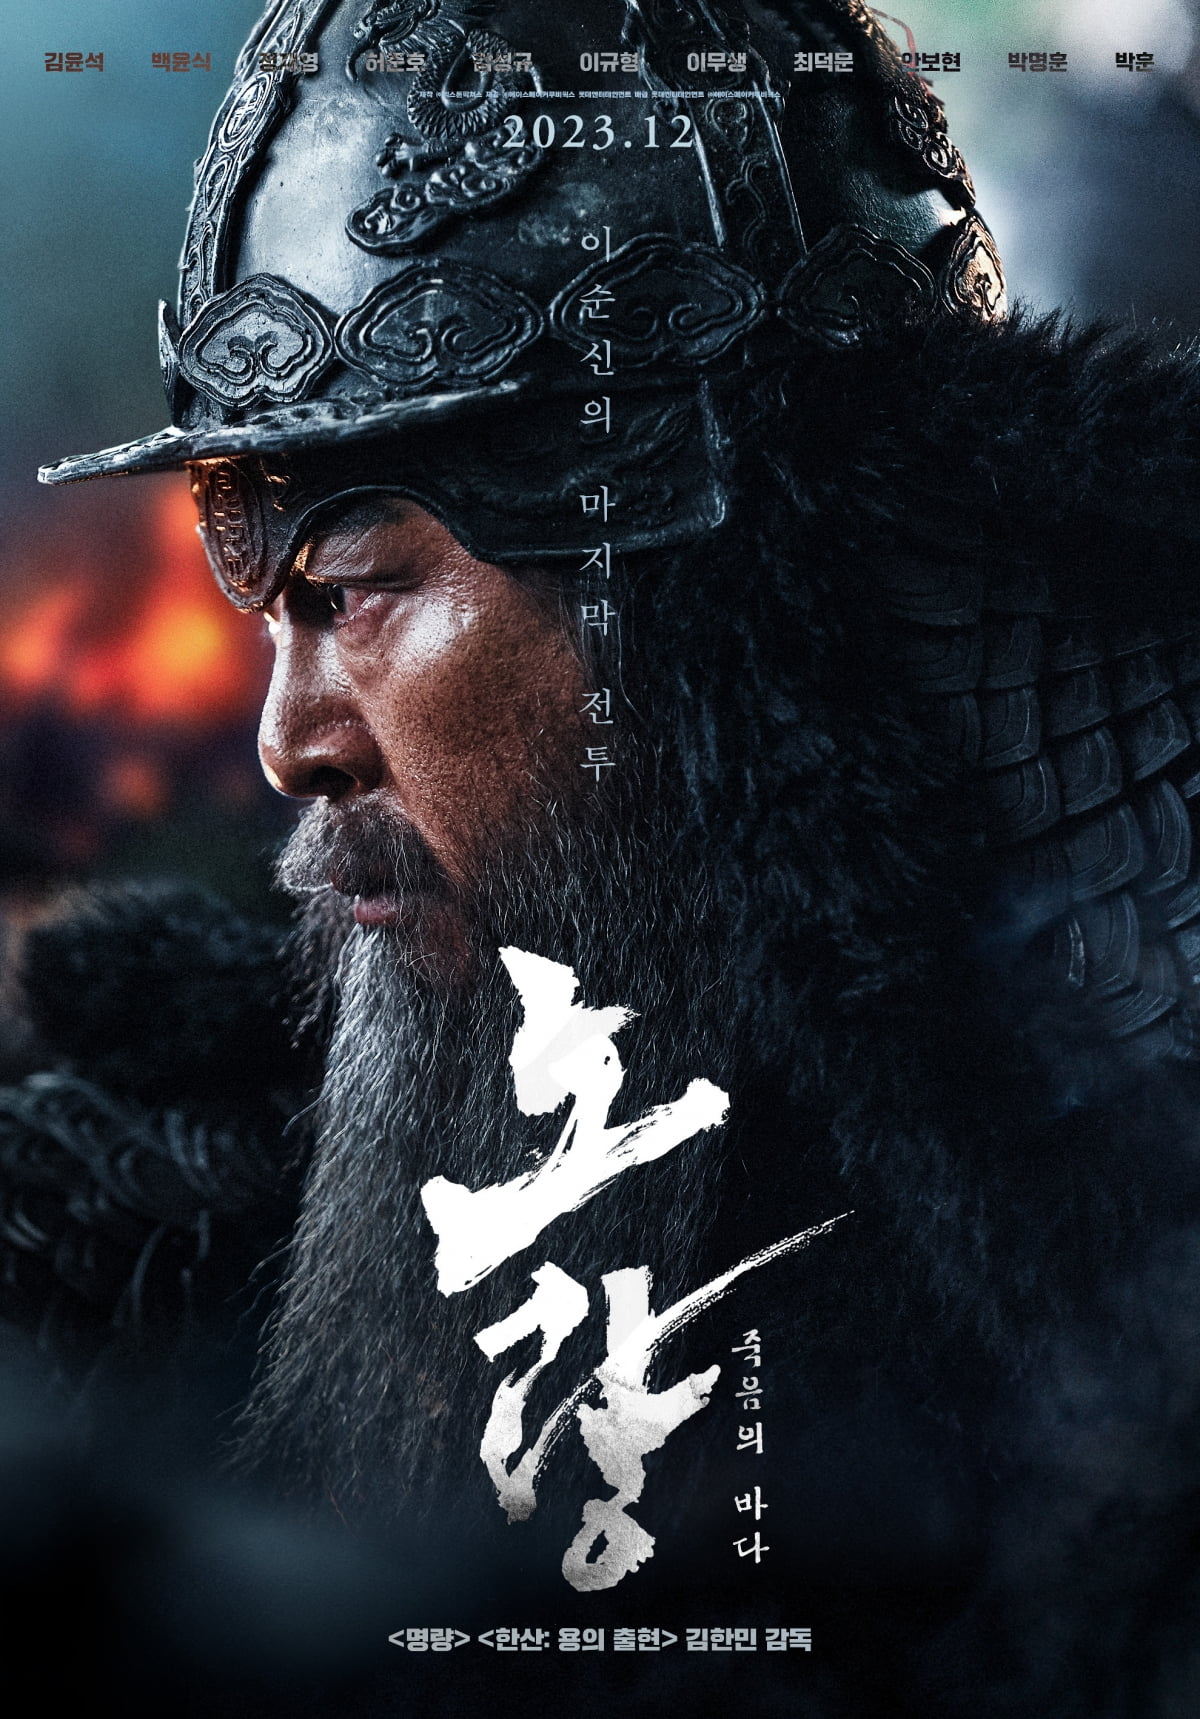 Movie 'Noryang: Deadly Sea' depicts Admiral Yi Sun-sin's final battle